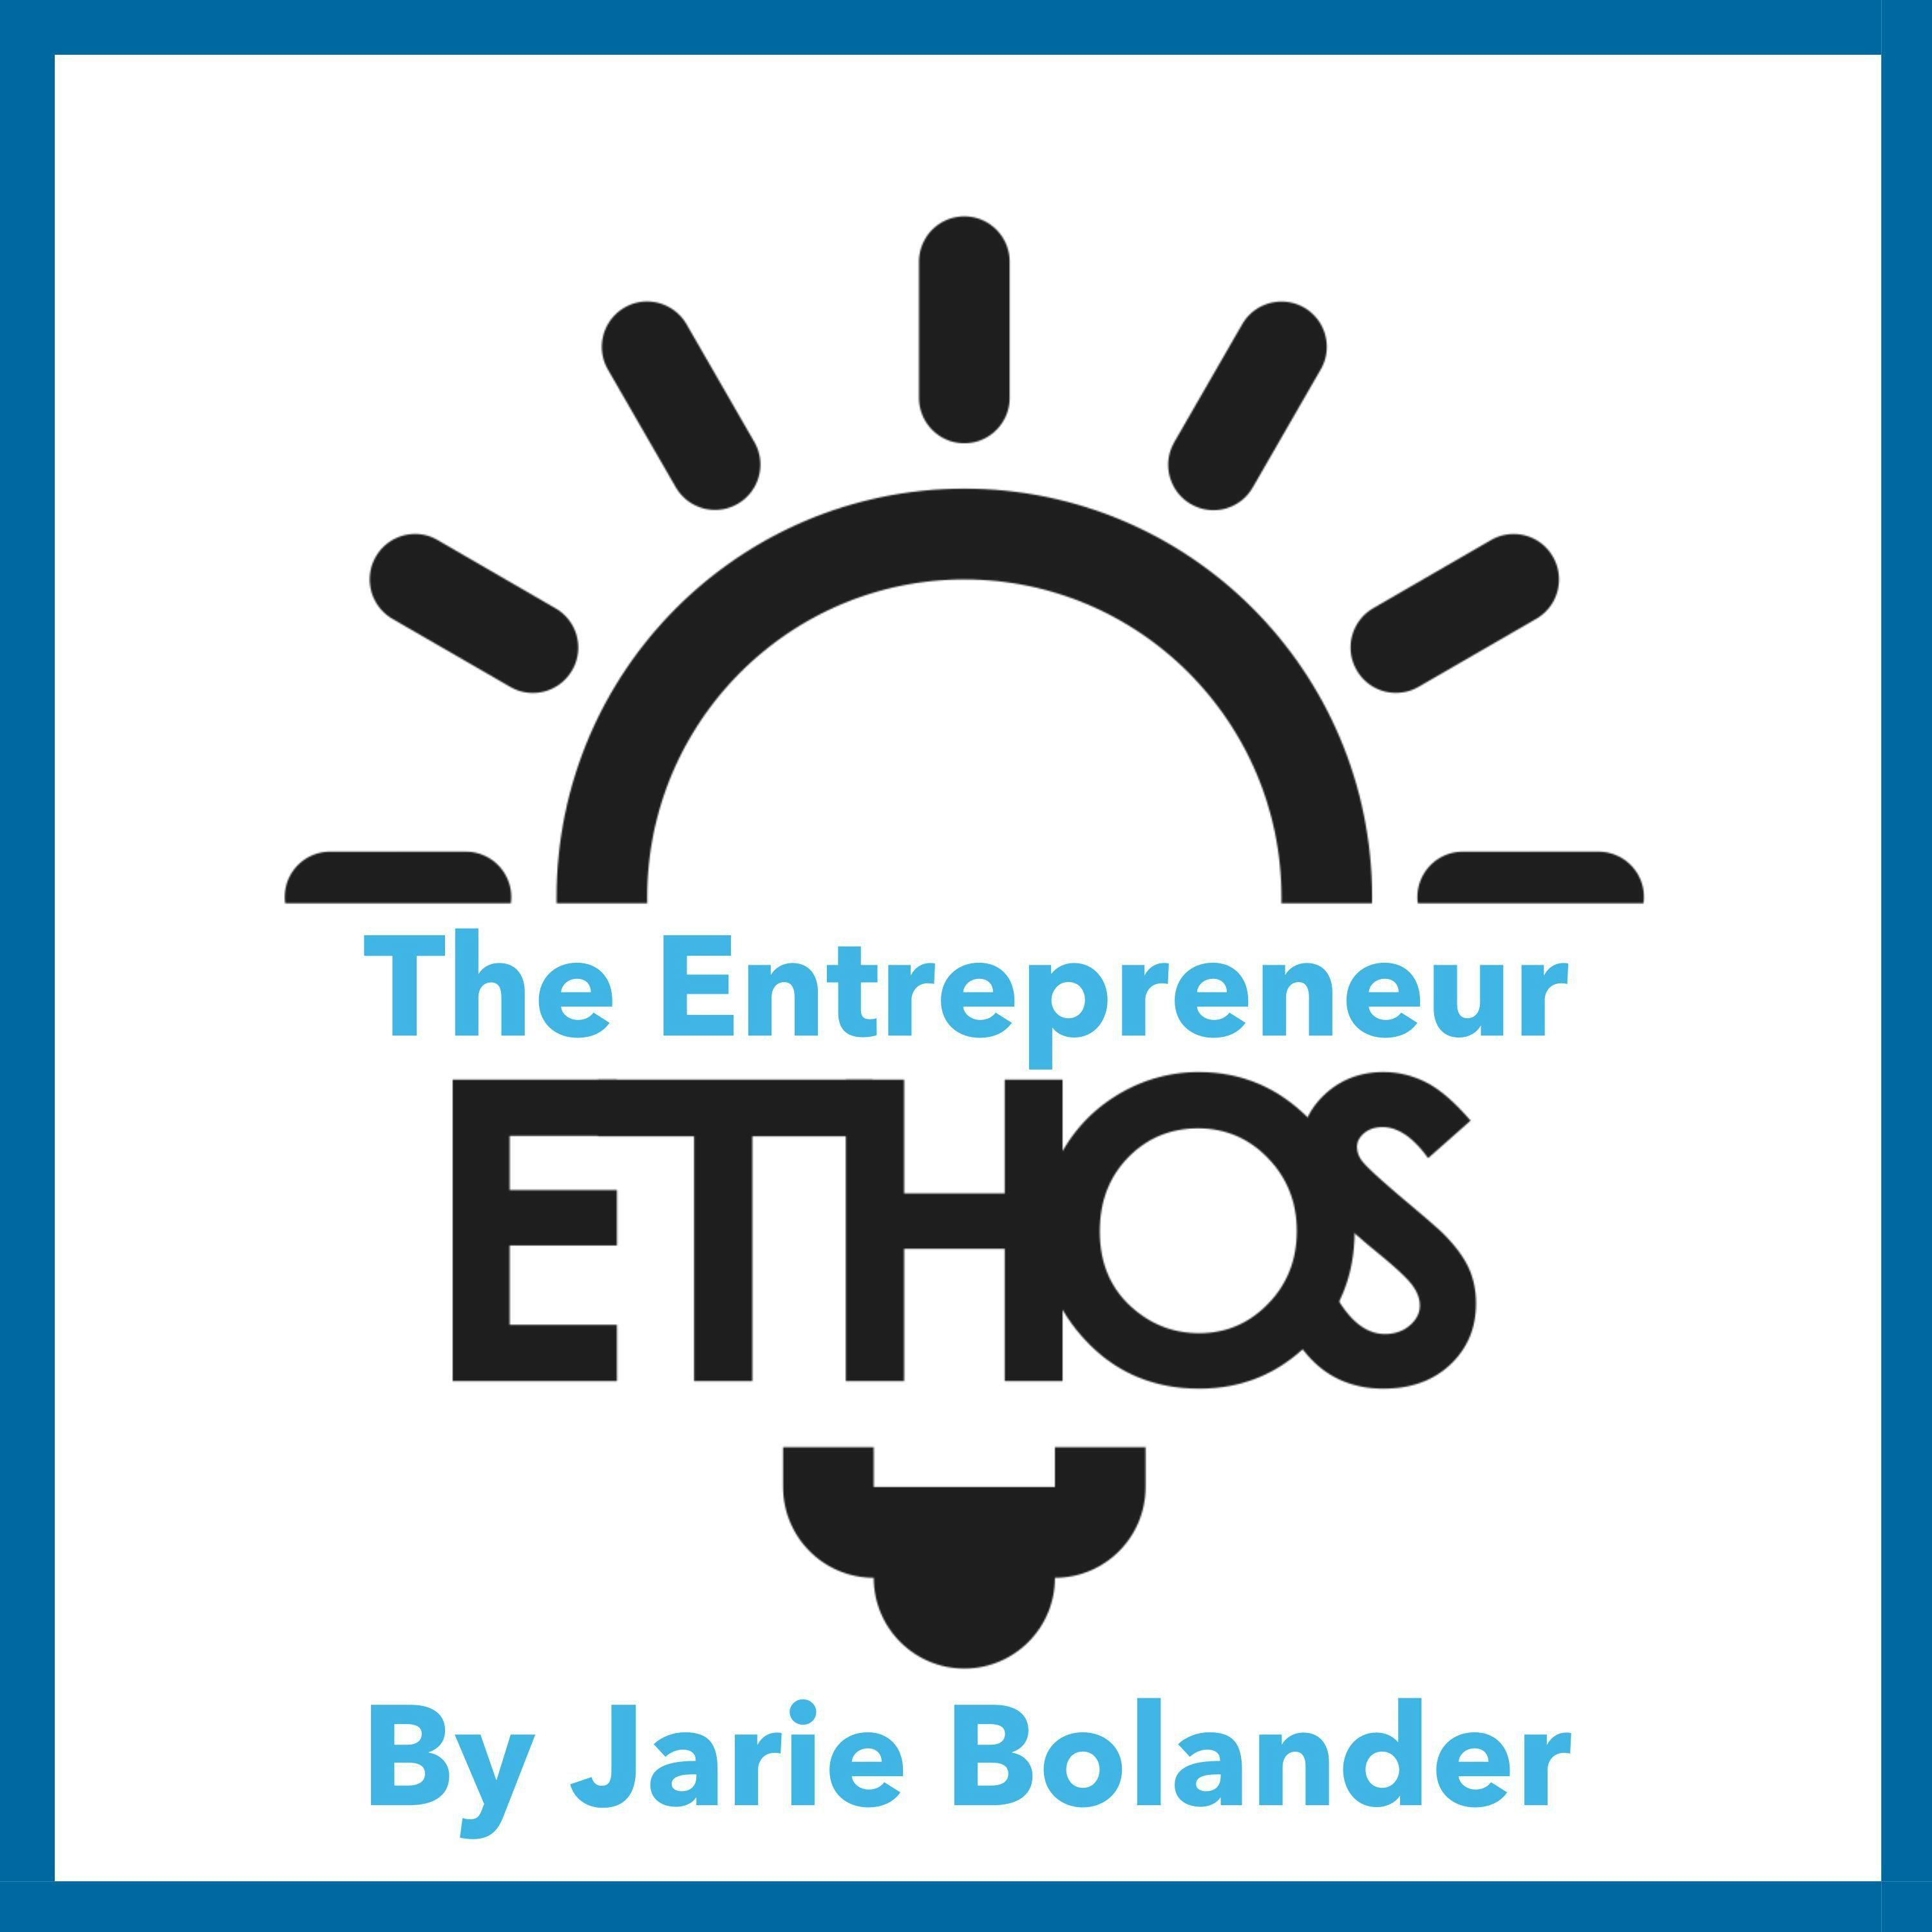 The Entrepreneur Ethos: How to Build a More Ethical, Inclusive, and Resilient Entrepreneur Community - Jarie Bolander